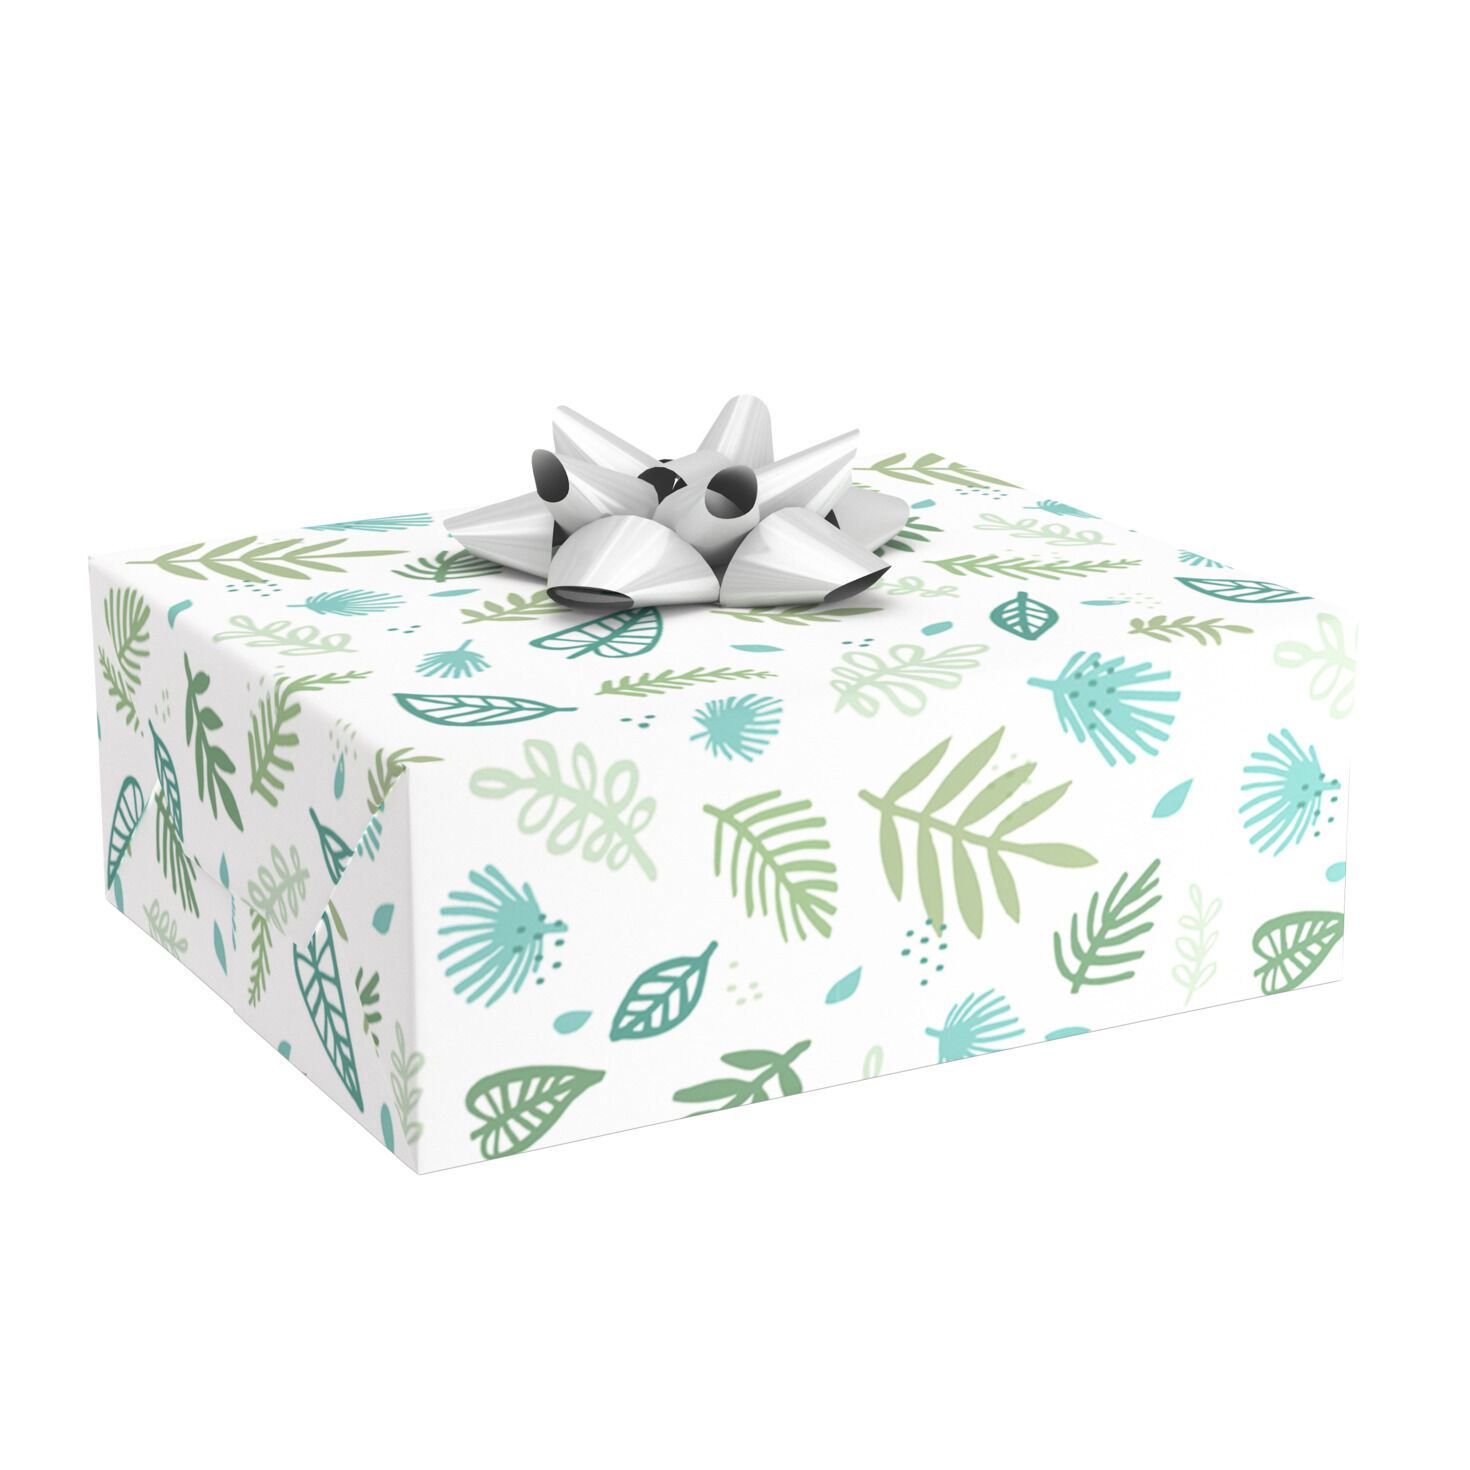 30 in x 5 Ft Roll w/ Ribbon Gift Wrap Paper Pack of 8 